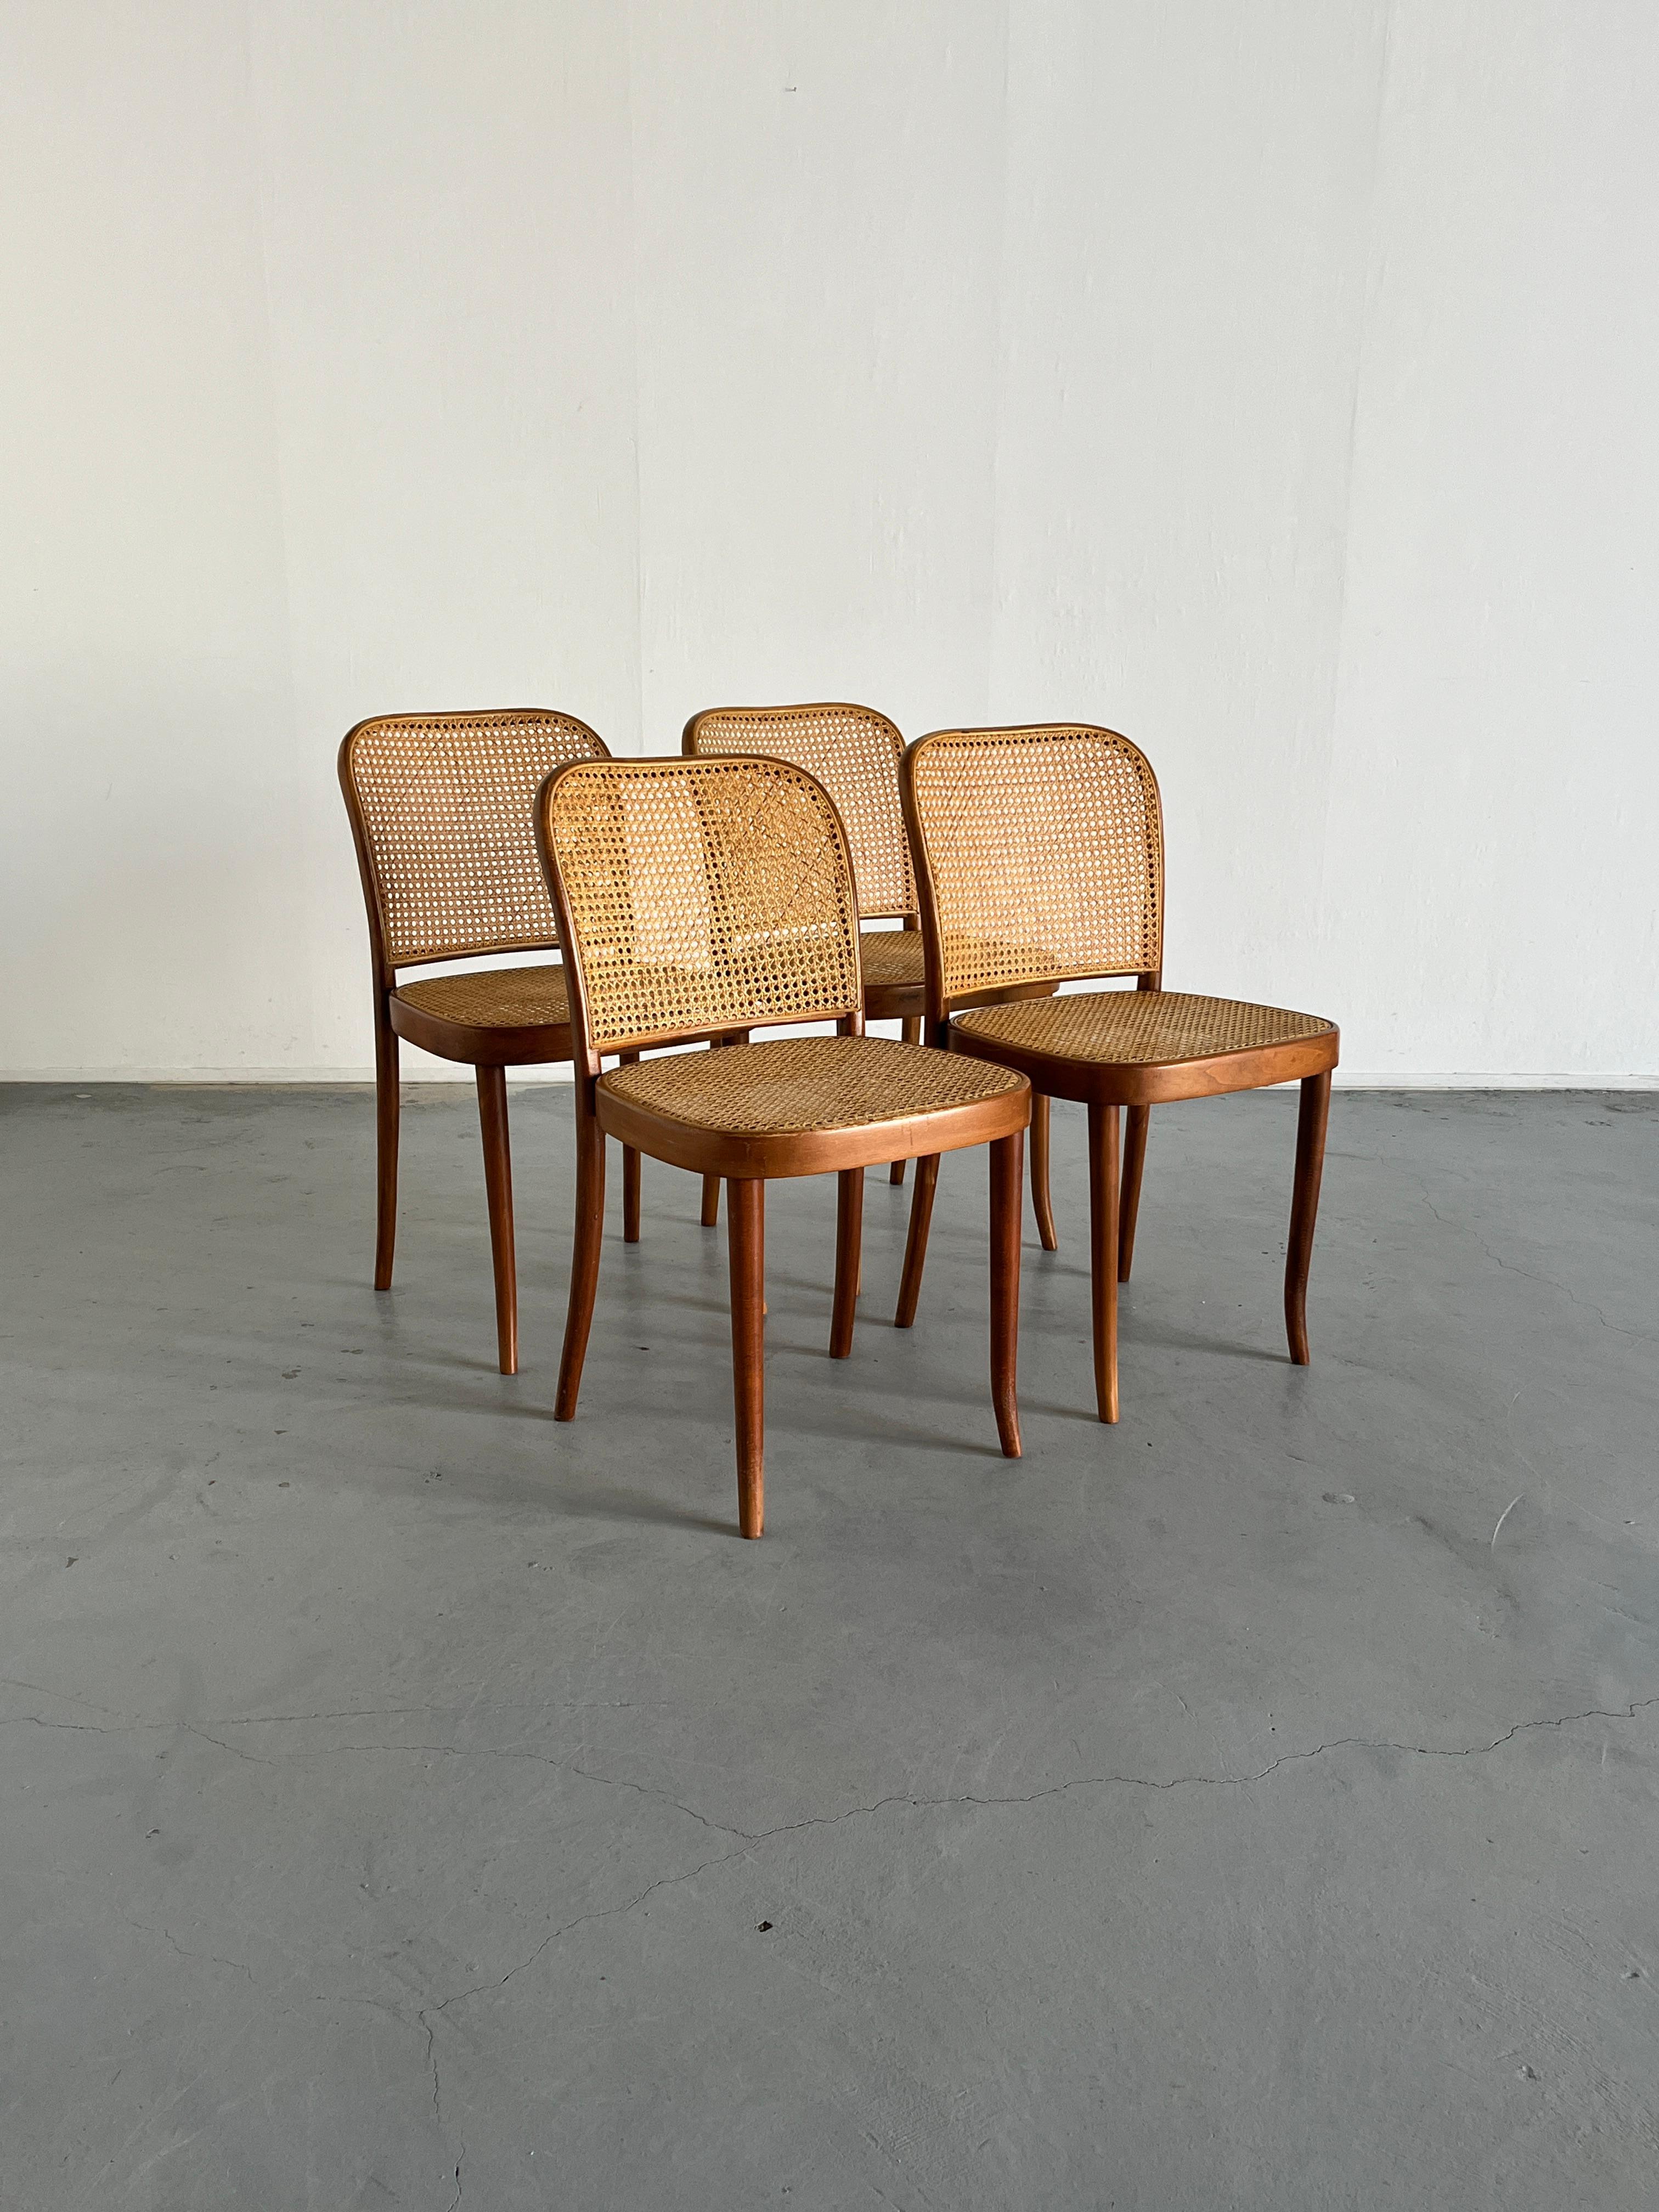 Croatian Set of 4 Vintage Thonet Bentwood No.811 Chairs, Designed by Josef Hoffman, 1970s